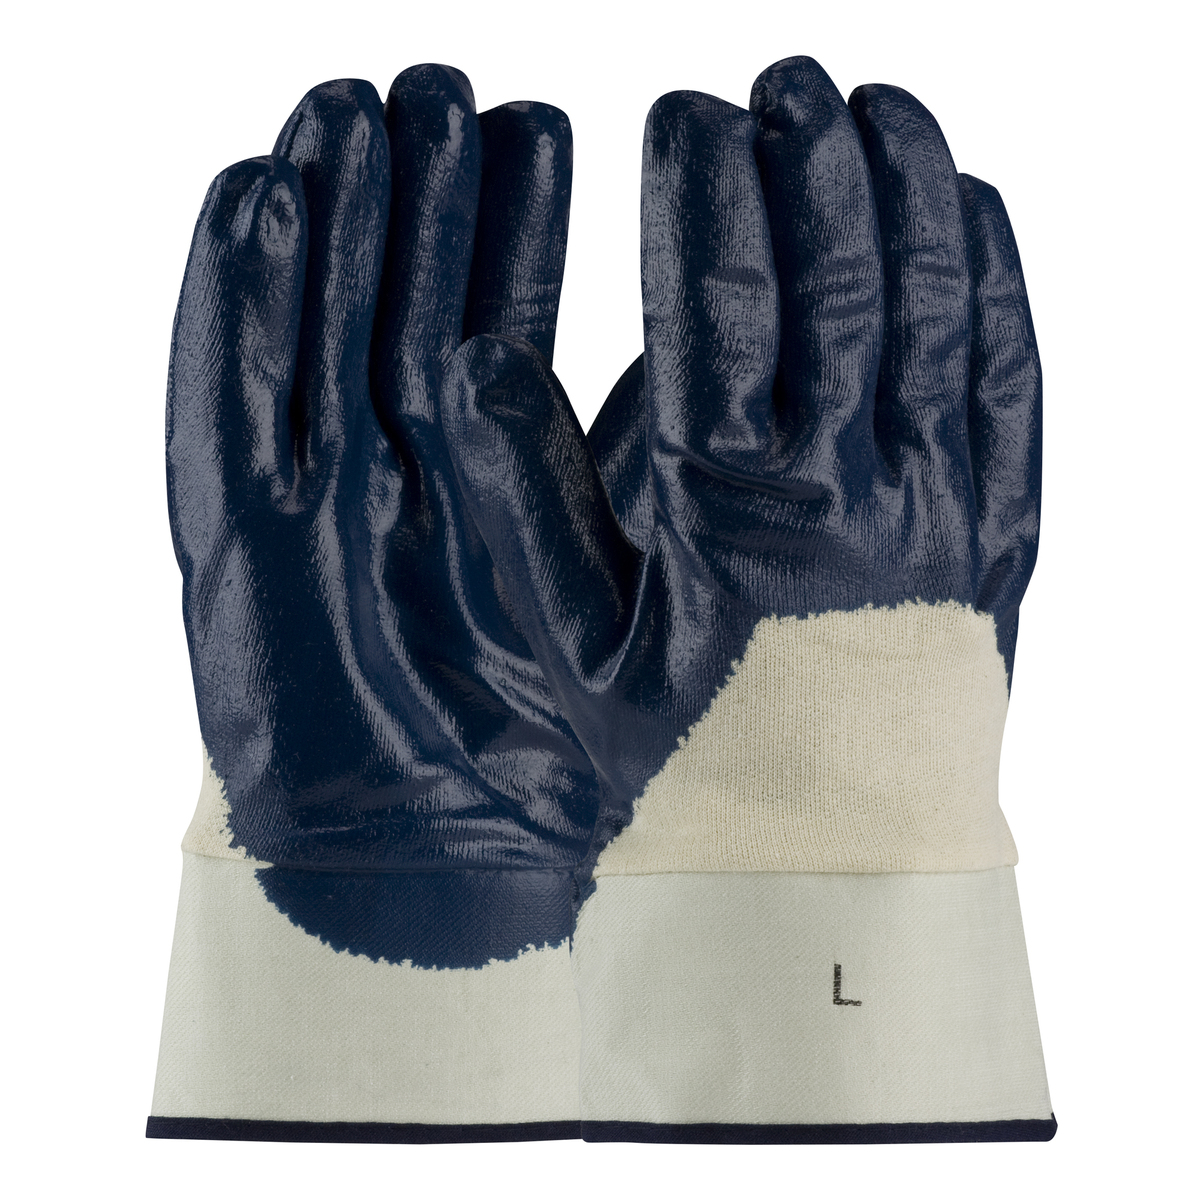 PIP® Large ArmorTuff® Standard Blue Nitrile Palm, Finger And Knuckles Coated Work Gloves With Cotton Liner And Safety Cuff